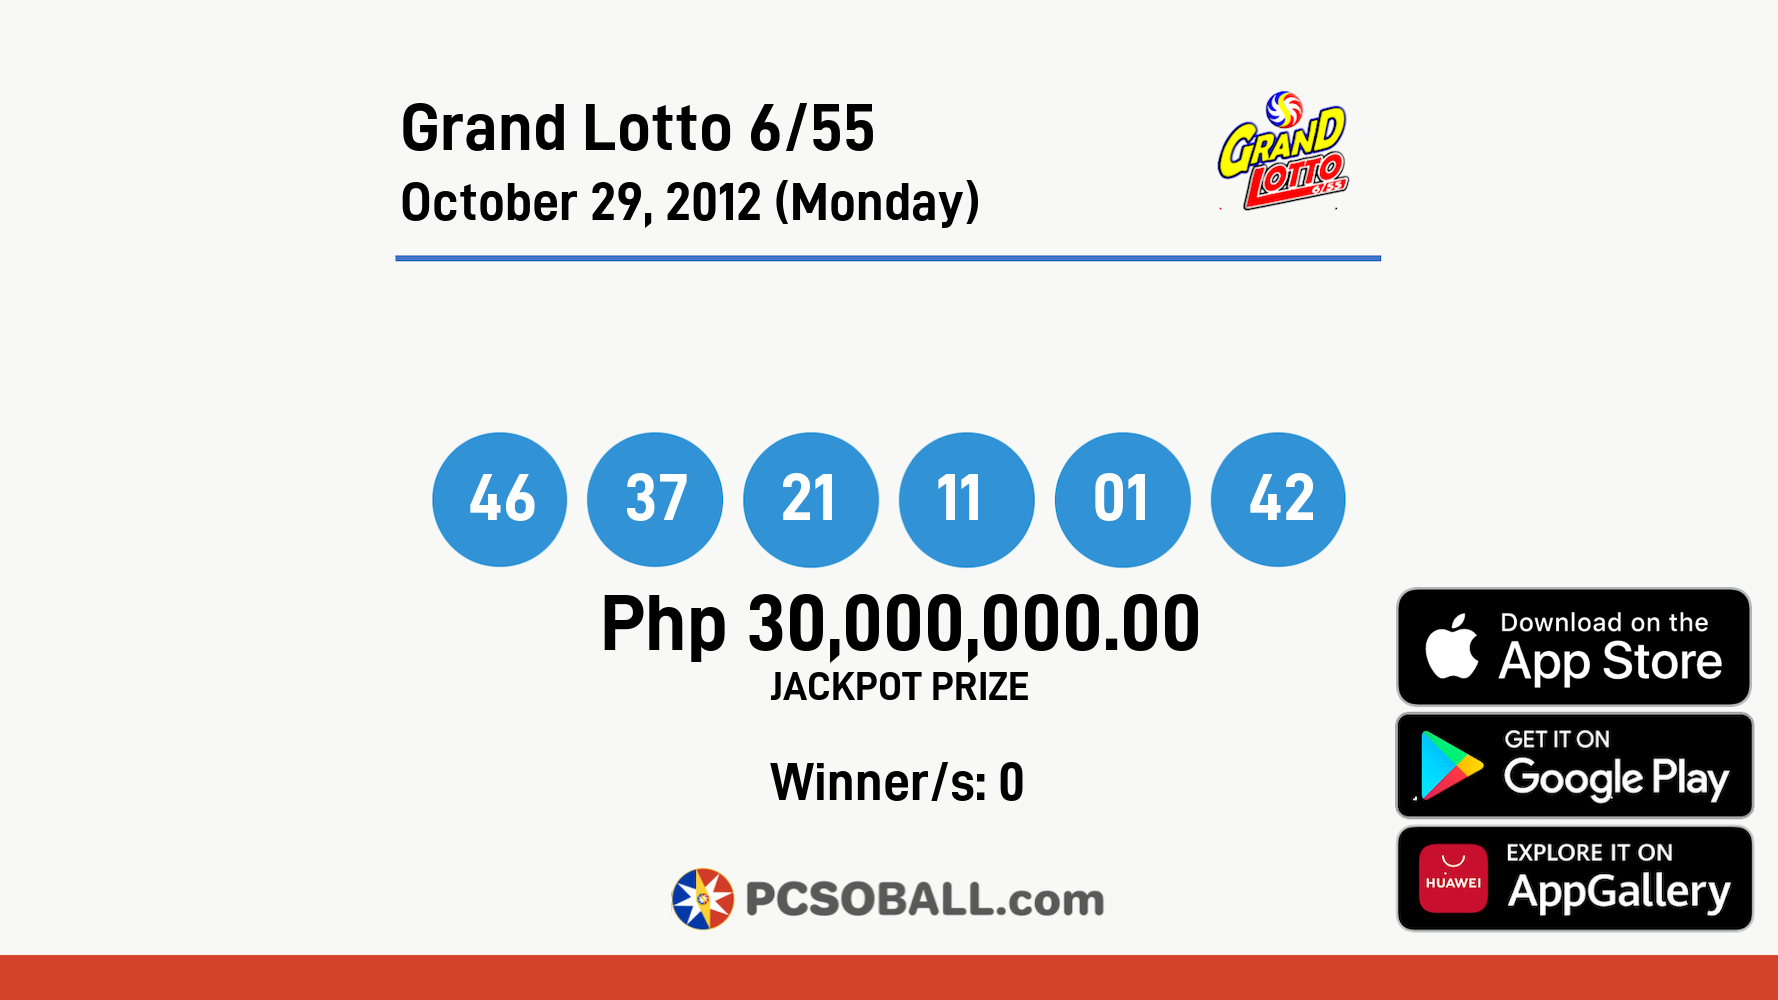 Grand Lotto 6/55 October 29, 2012 (Monday) Result